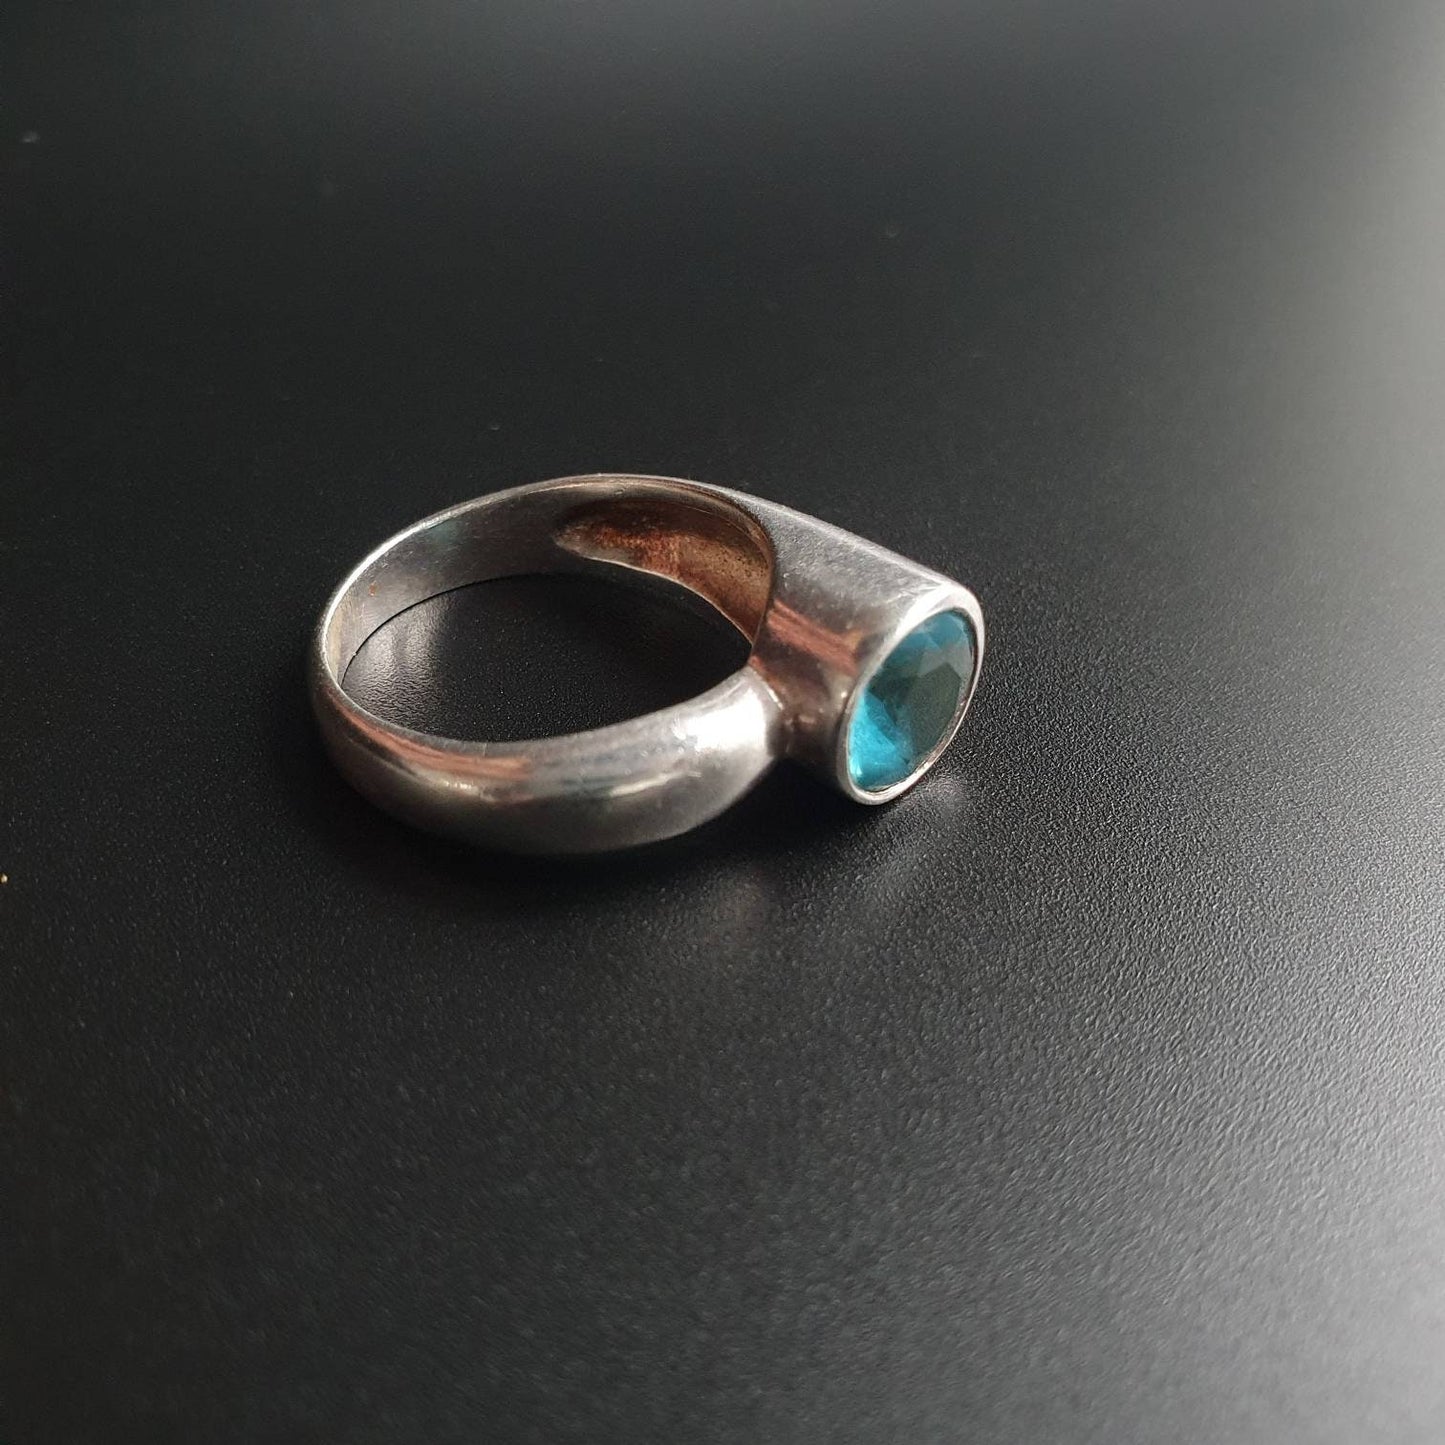 Silver ring, statement ring, aquamarine gemstone, ring, sterling, jewelry, gifts, horn, unique jewelry, blue gemstone, silver jewellery,925